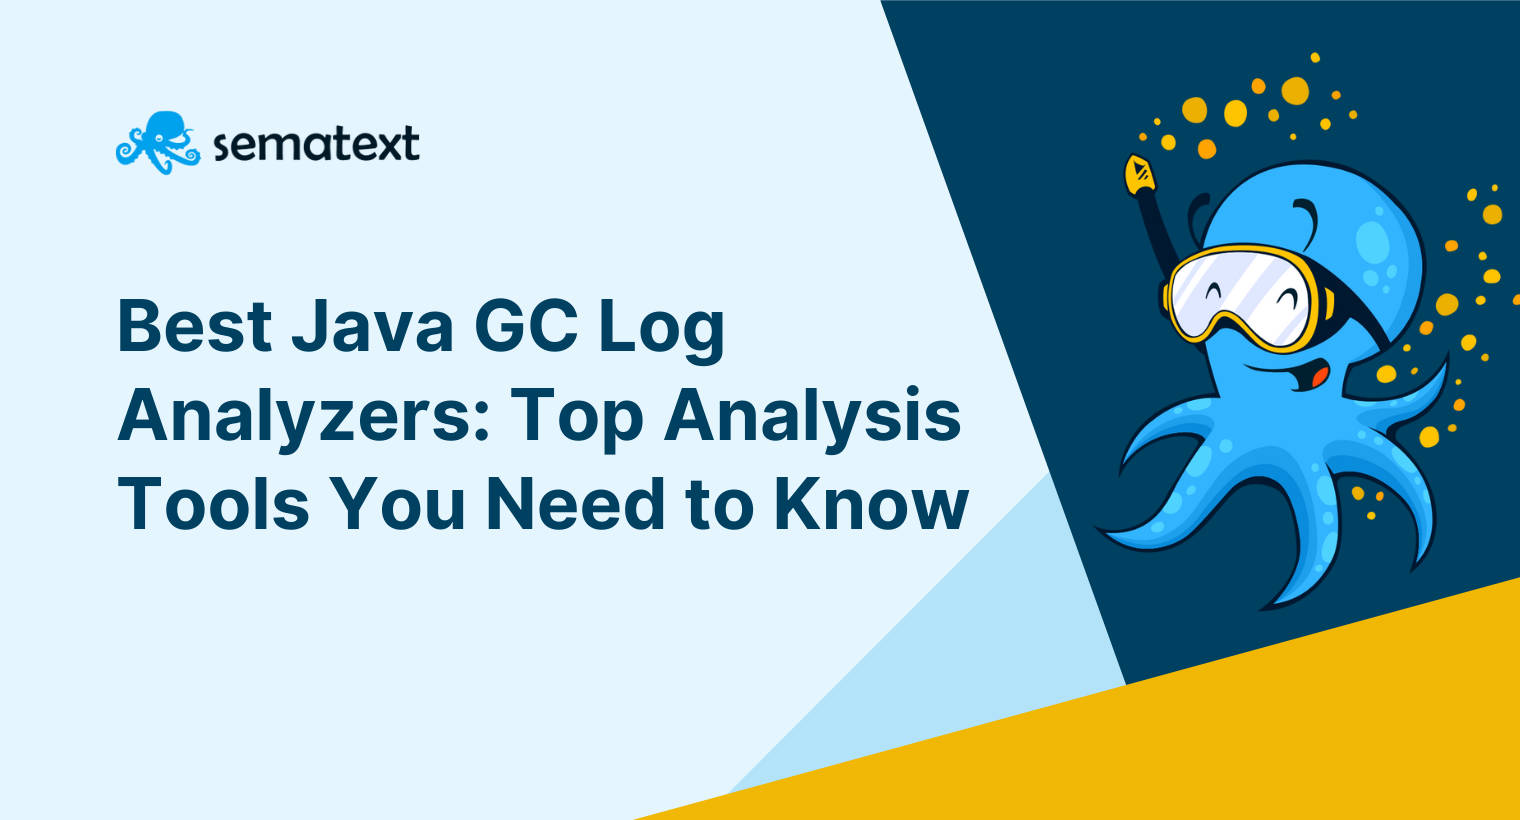 Best Java GC Log Analyzers: Top Analysis Tools You Need to Know in 2023